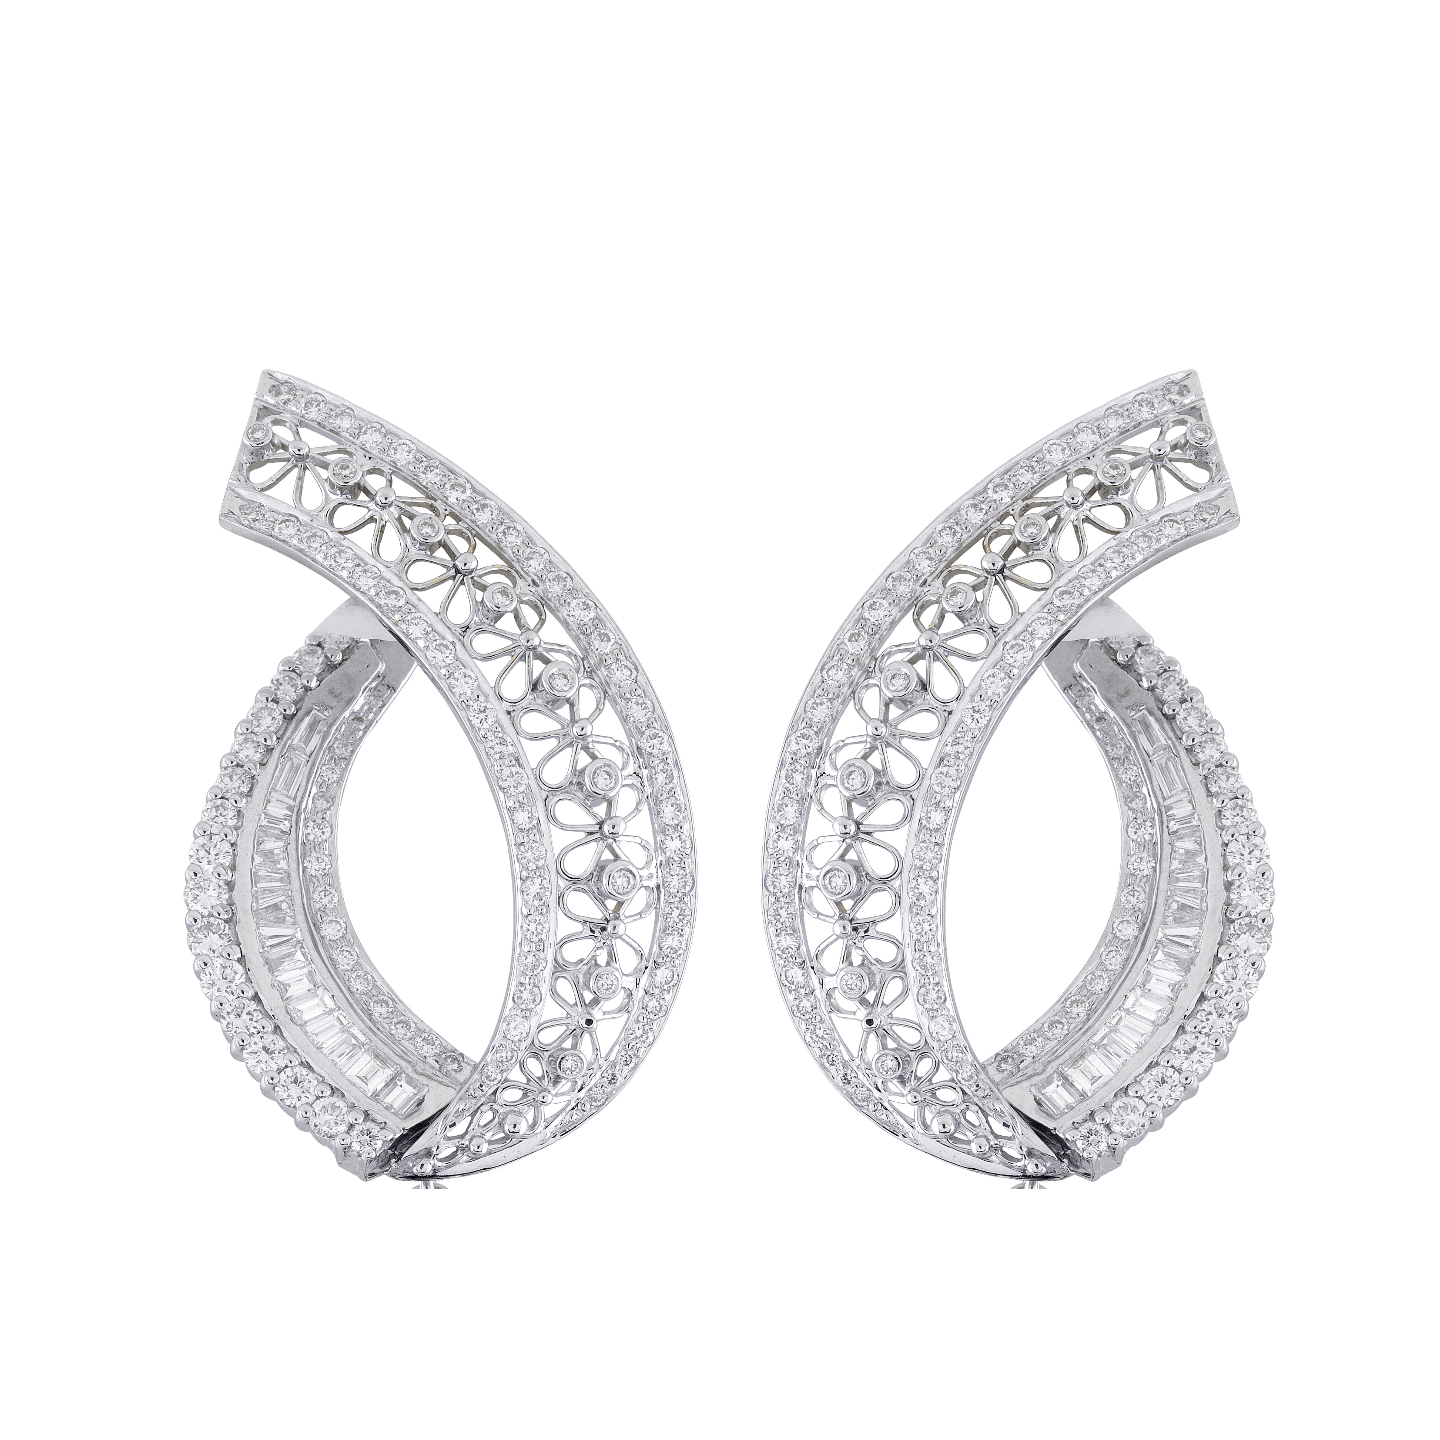 A stunning pair of floral filigree earings studded with rows of glitering diamonds in white gold